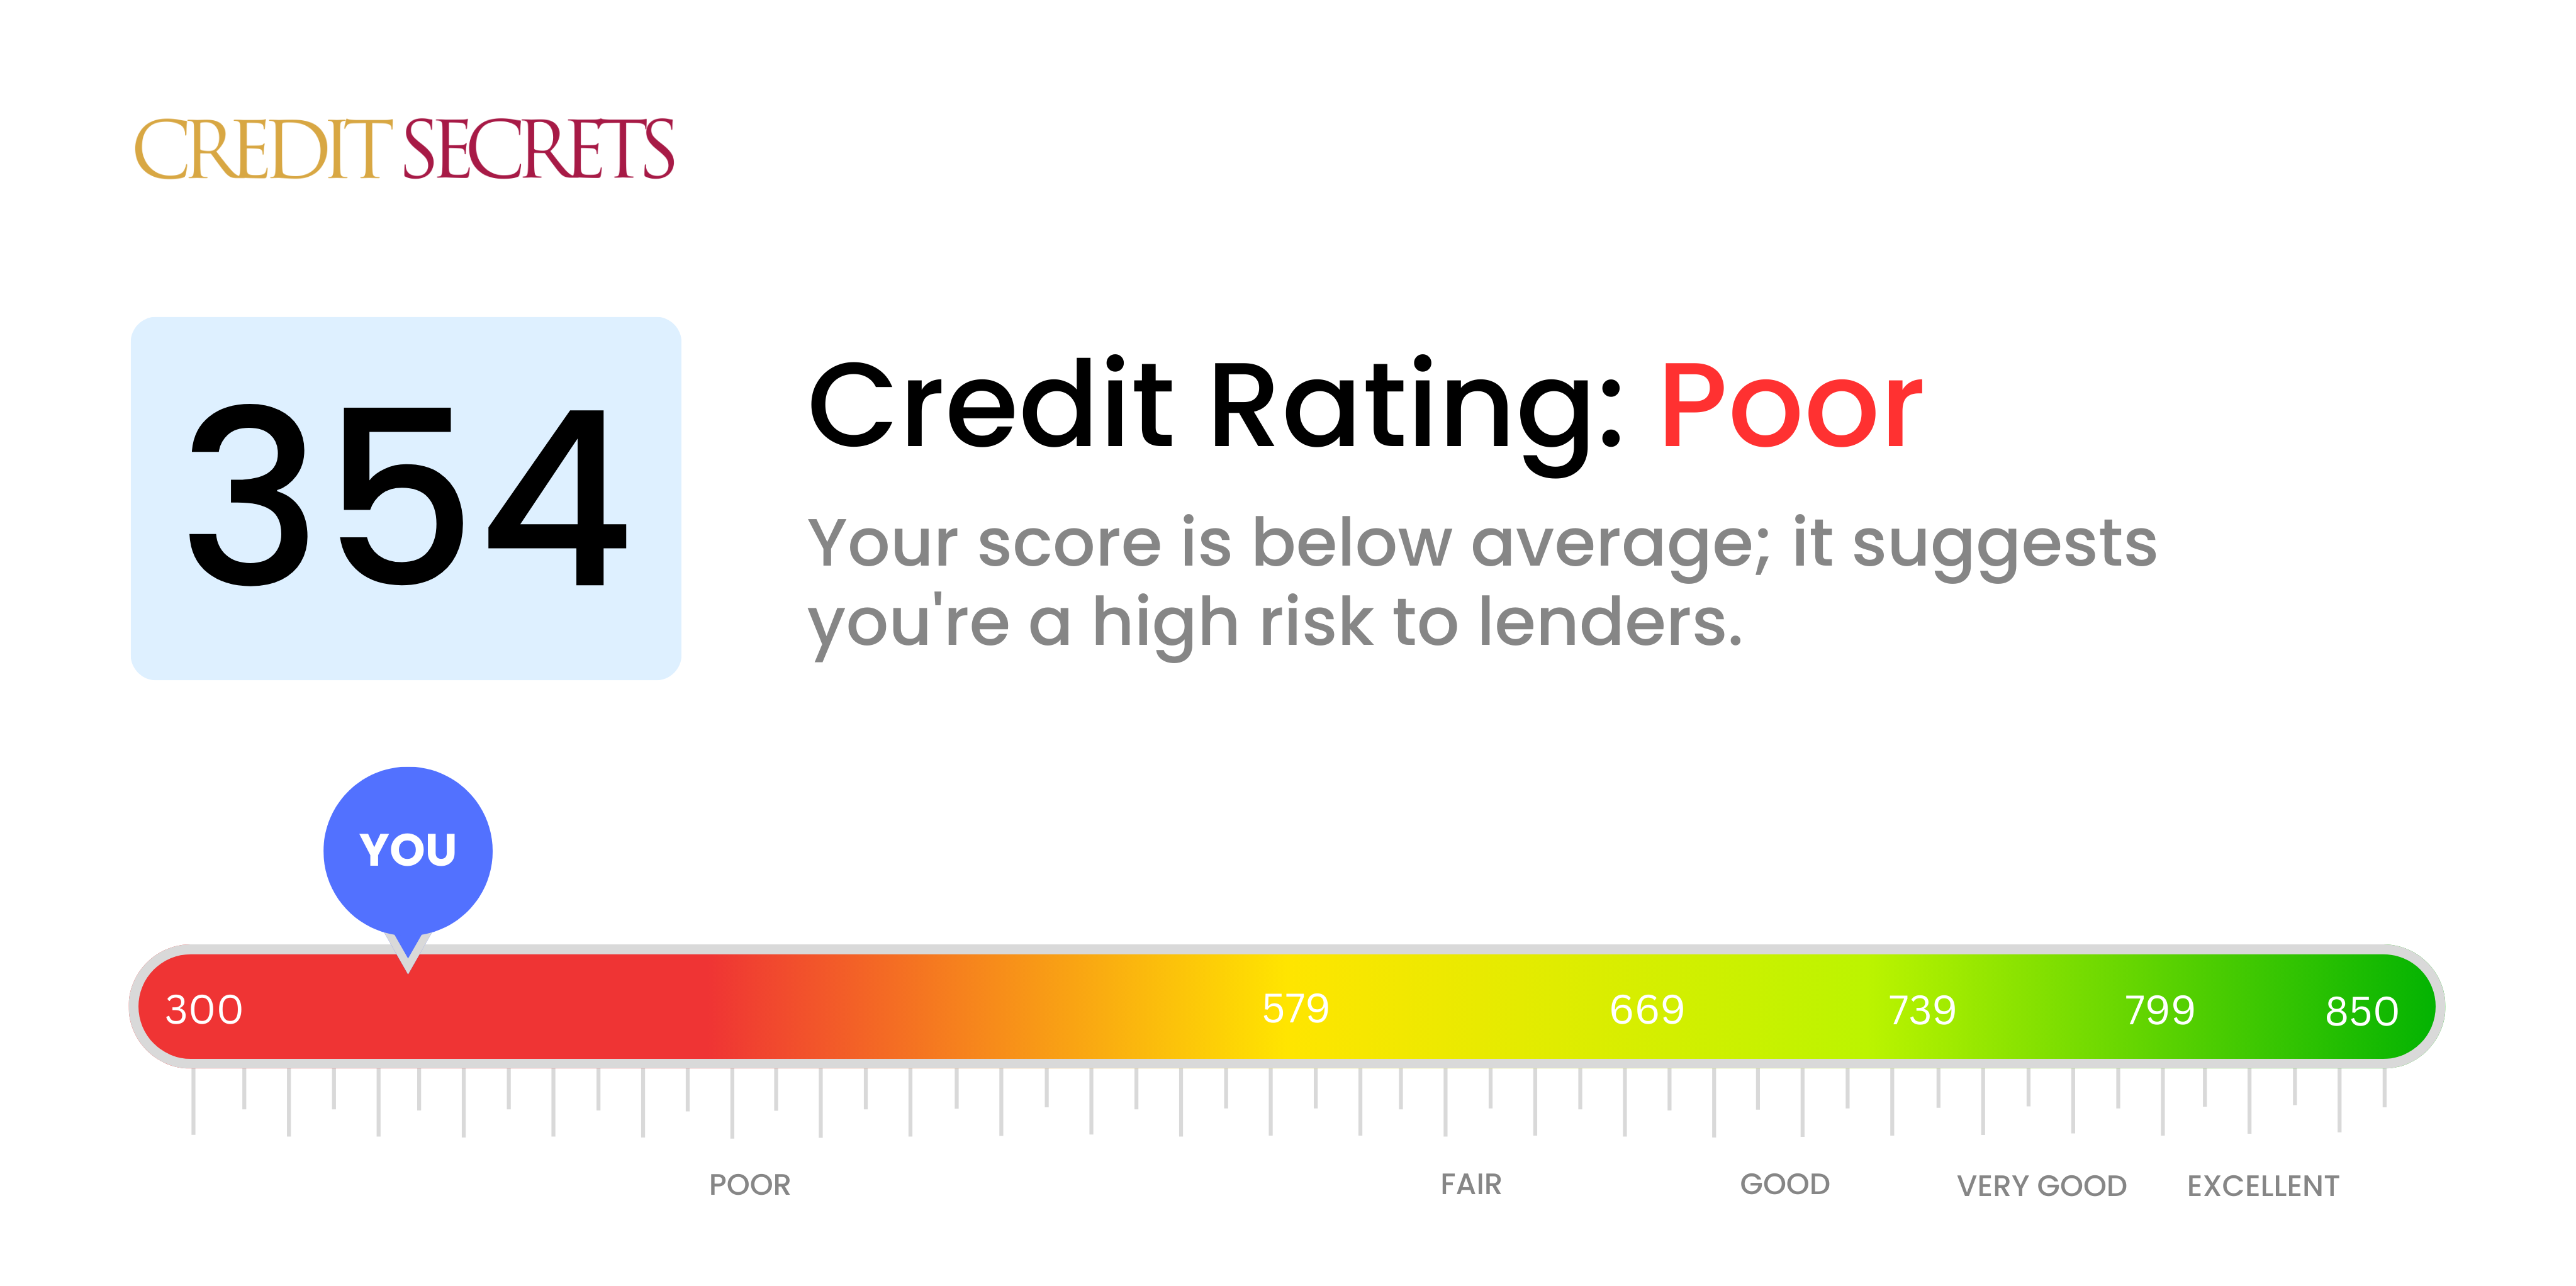 Is 354 a good credit score?